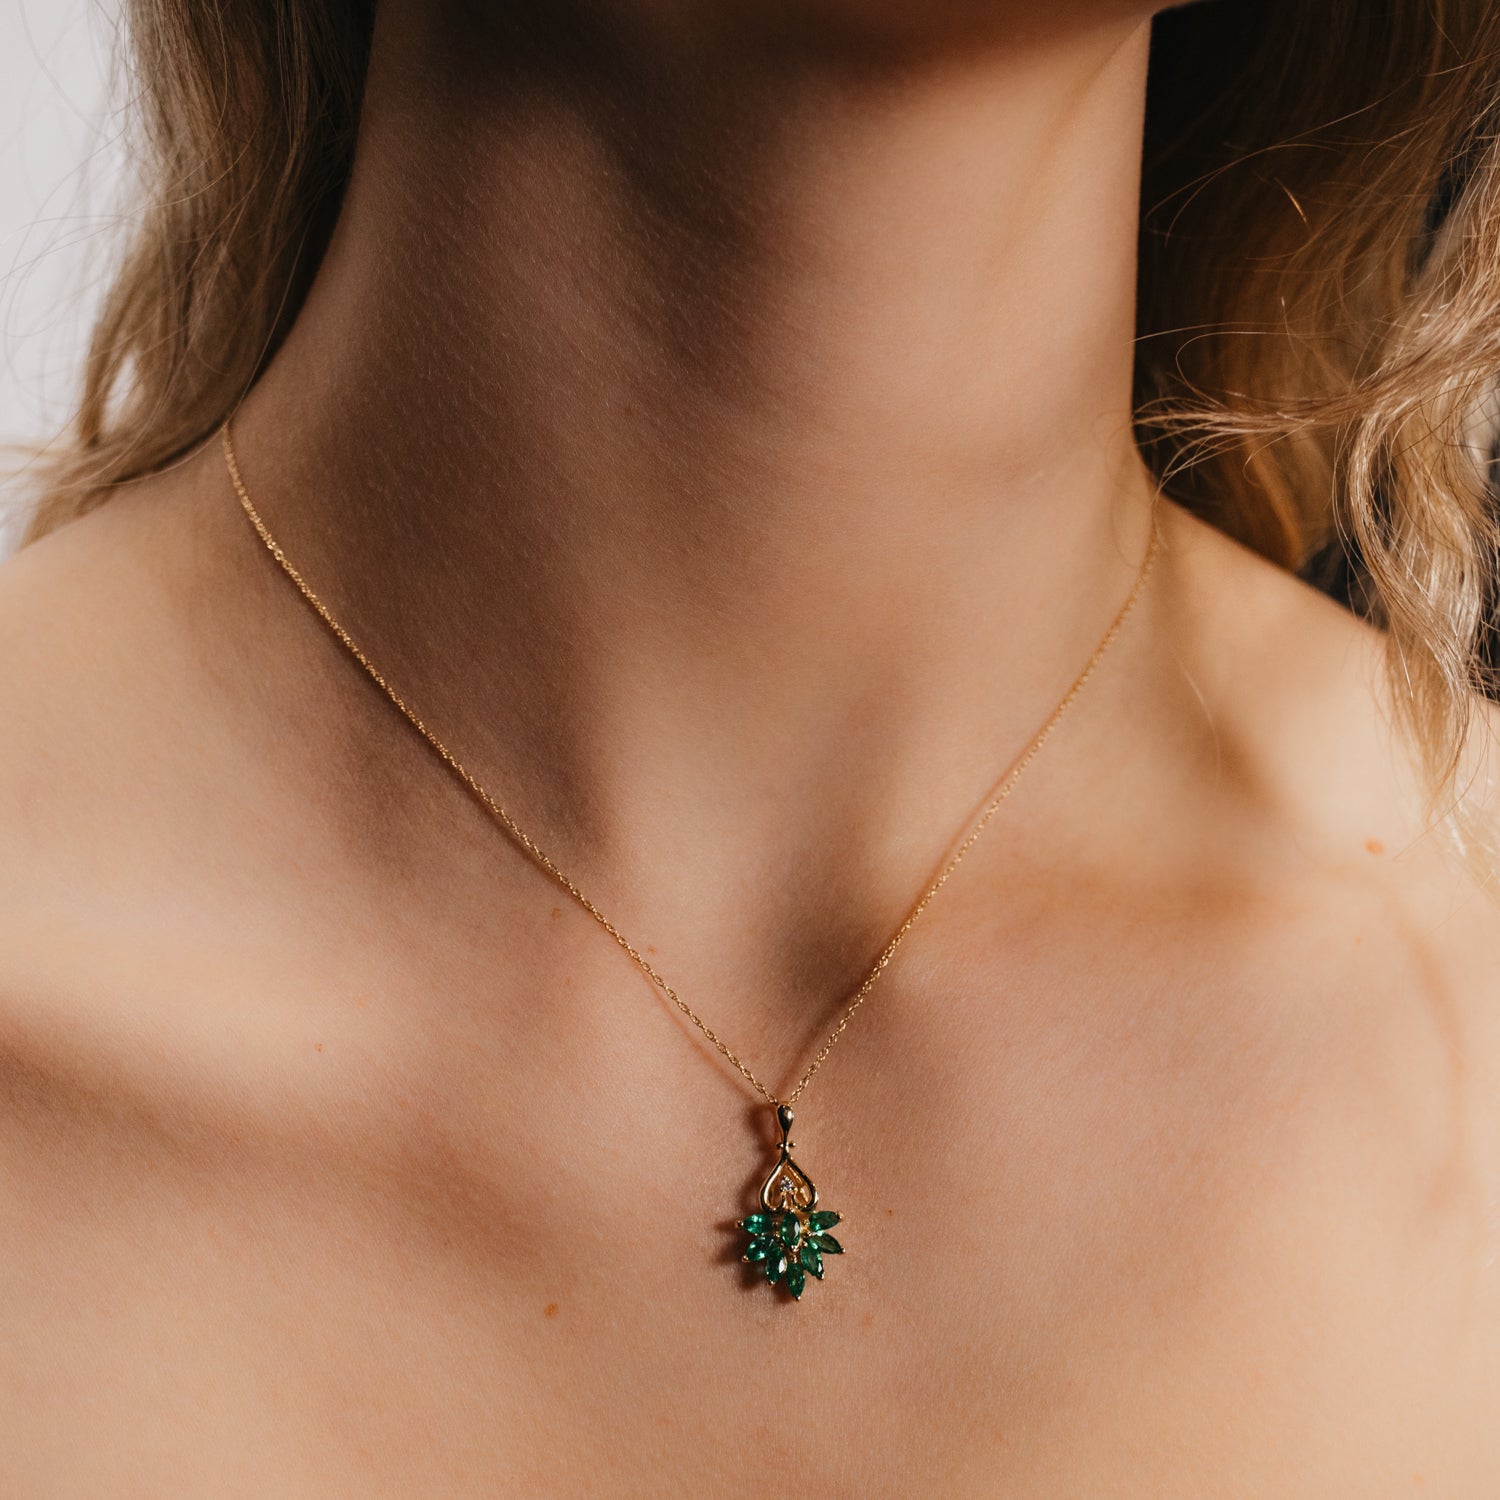 Marquise Emerald and Diamond Pendant Necklace